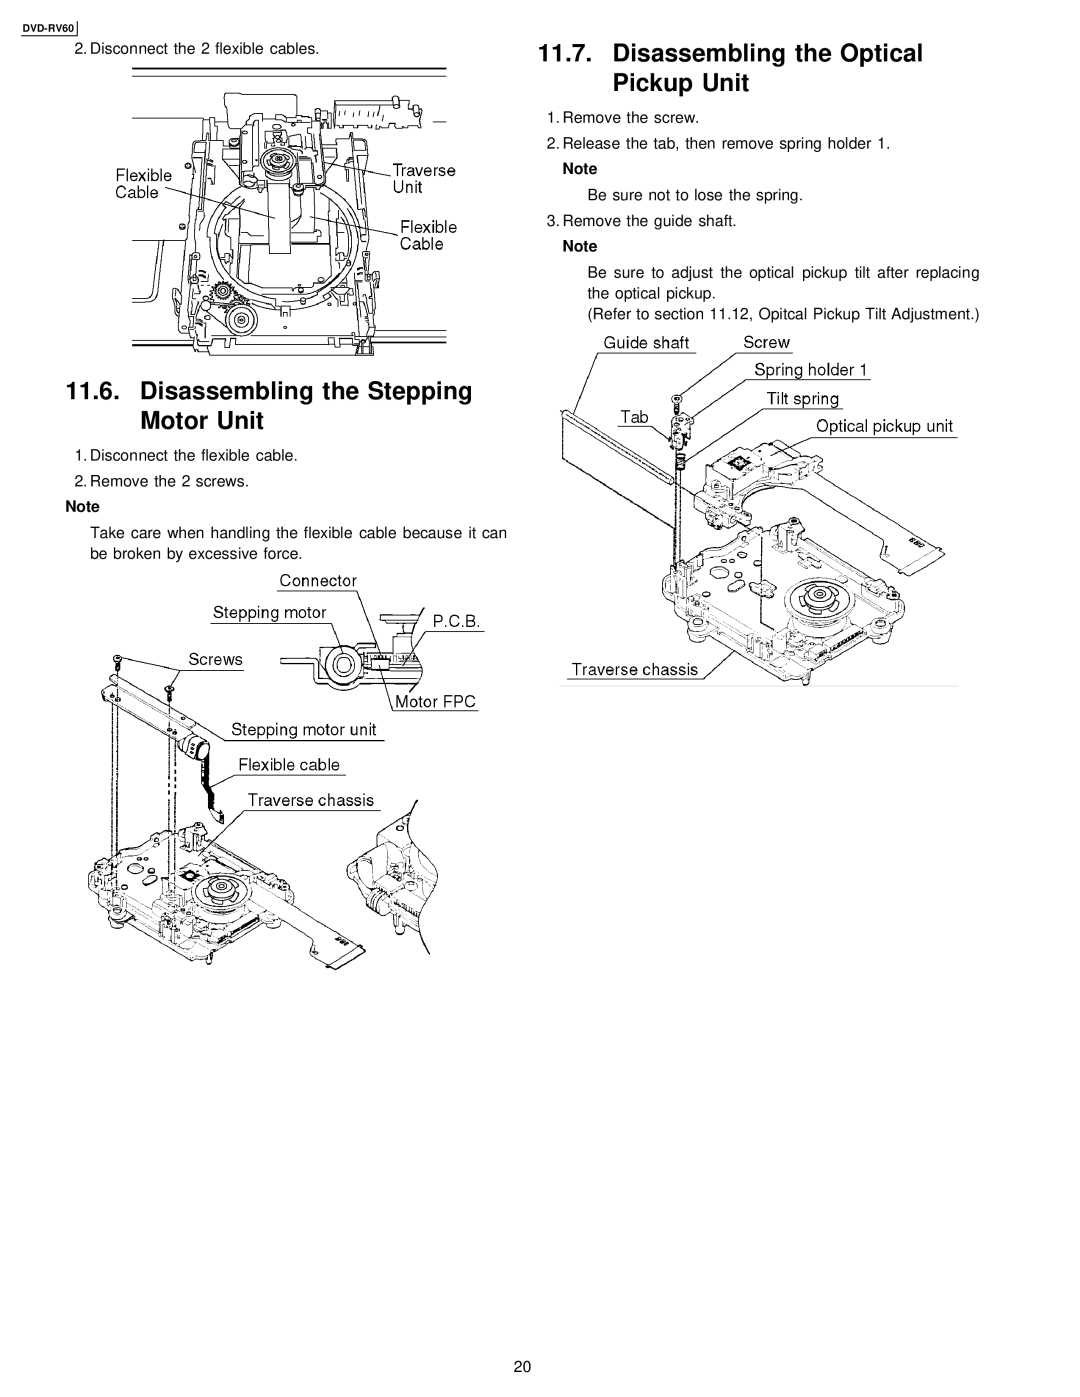 Panasonic DVDRV60 specifications Disassembling the Optical Pickup Unit, Disassembling the Stepping Motor Unit 